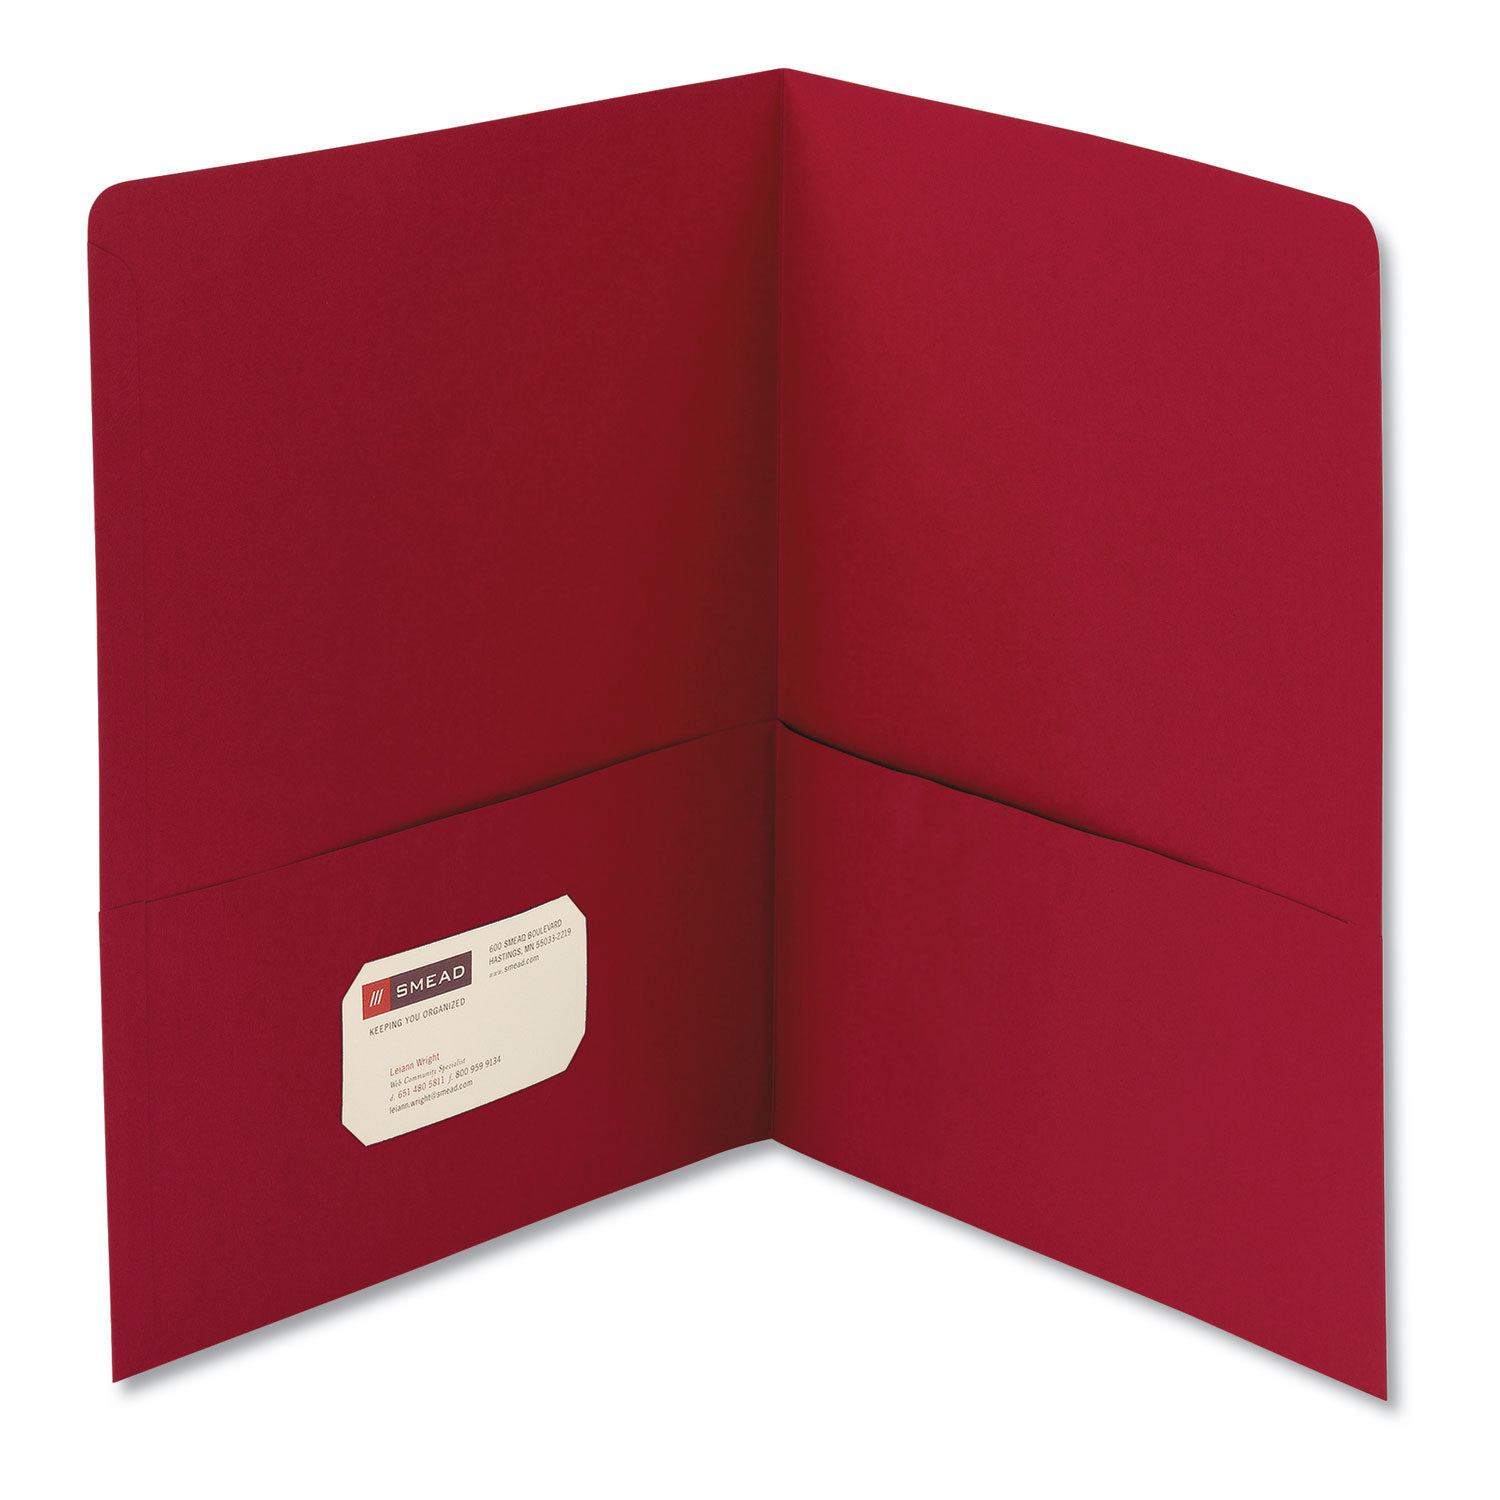  Smead 87859 Two-Pocket Folder, Textured Paper, Red, 25/Box (SMD87859) 